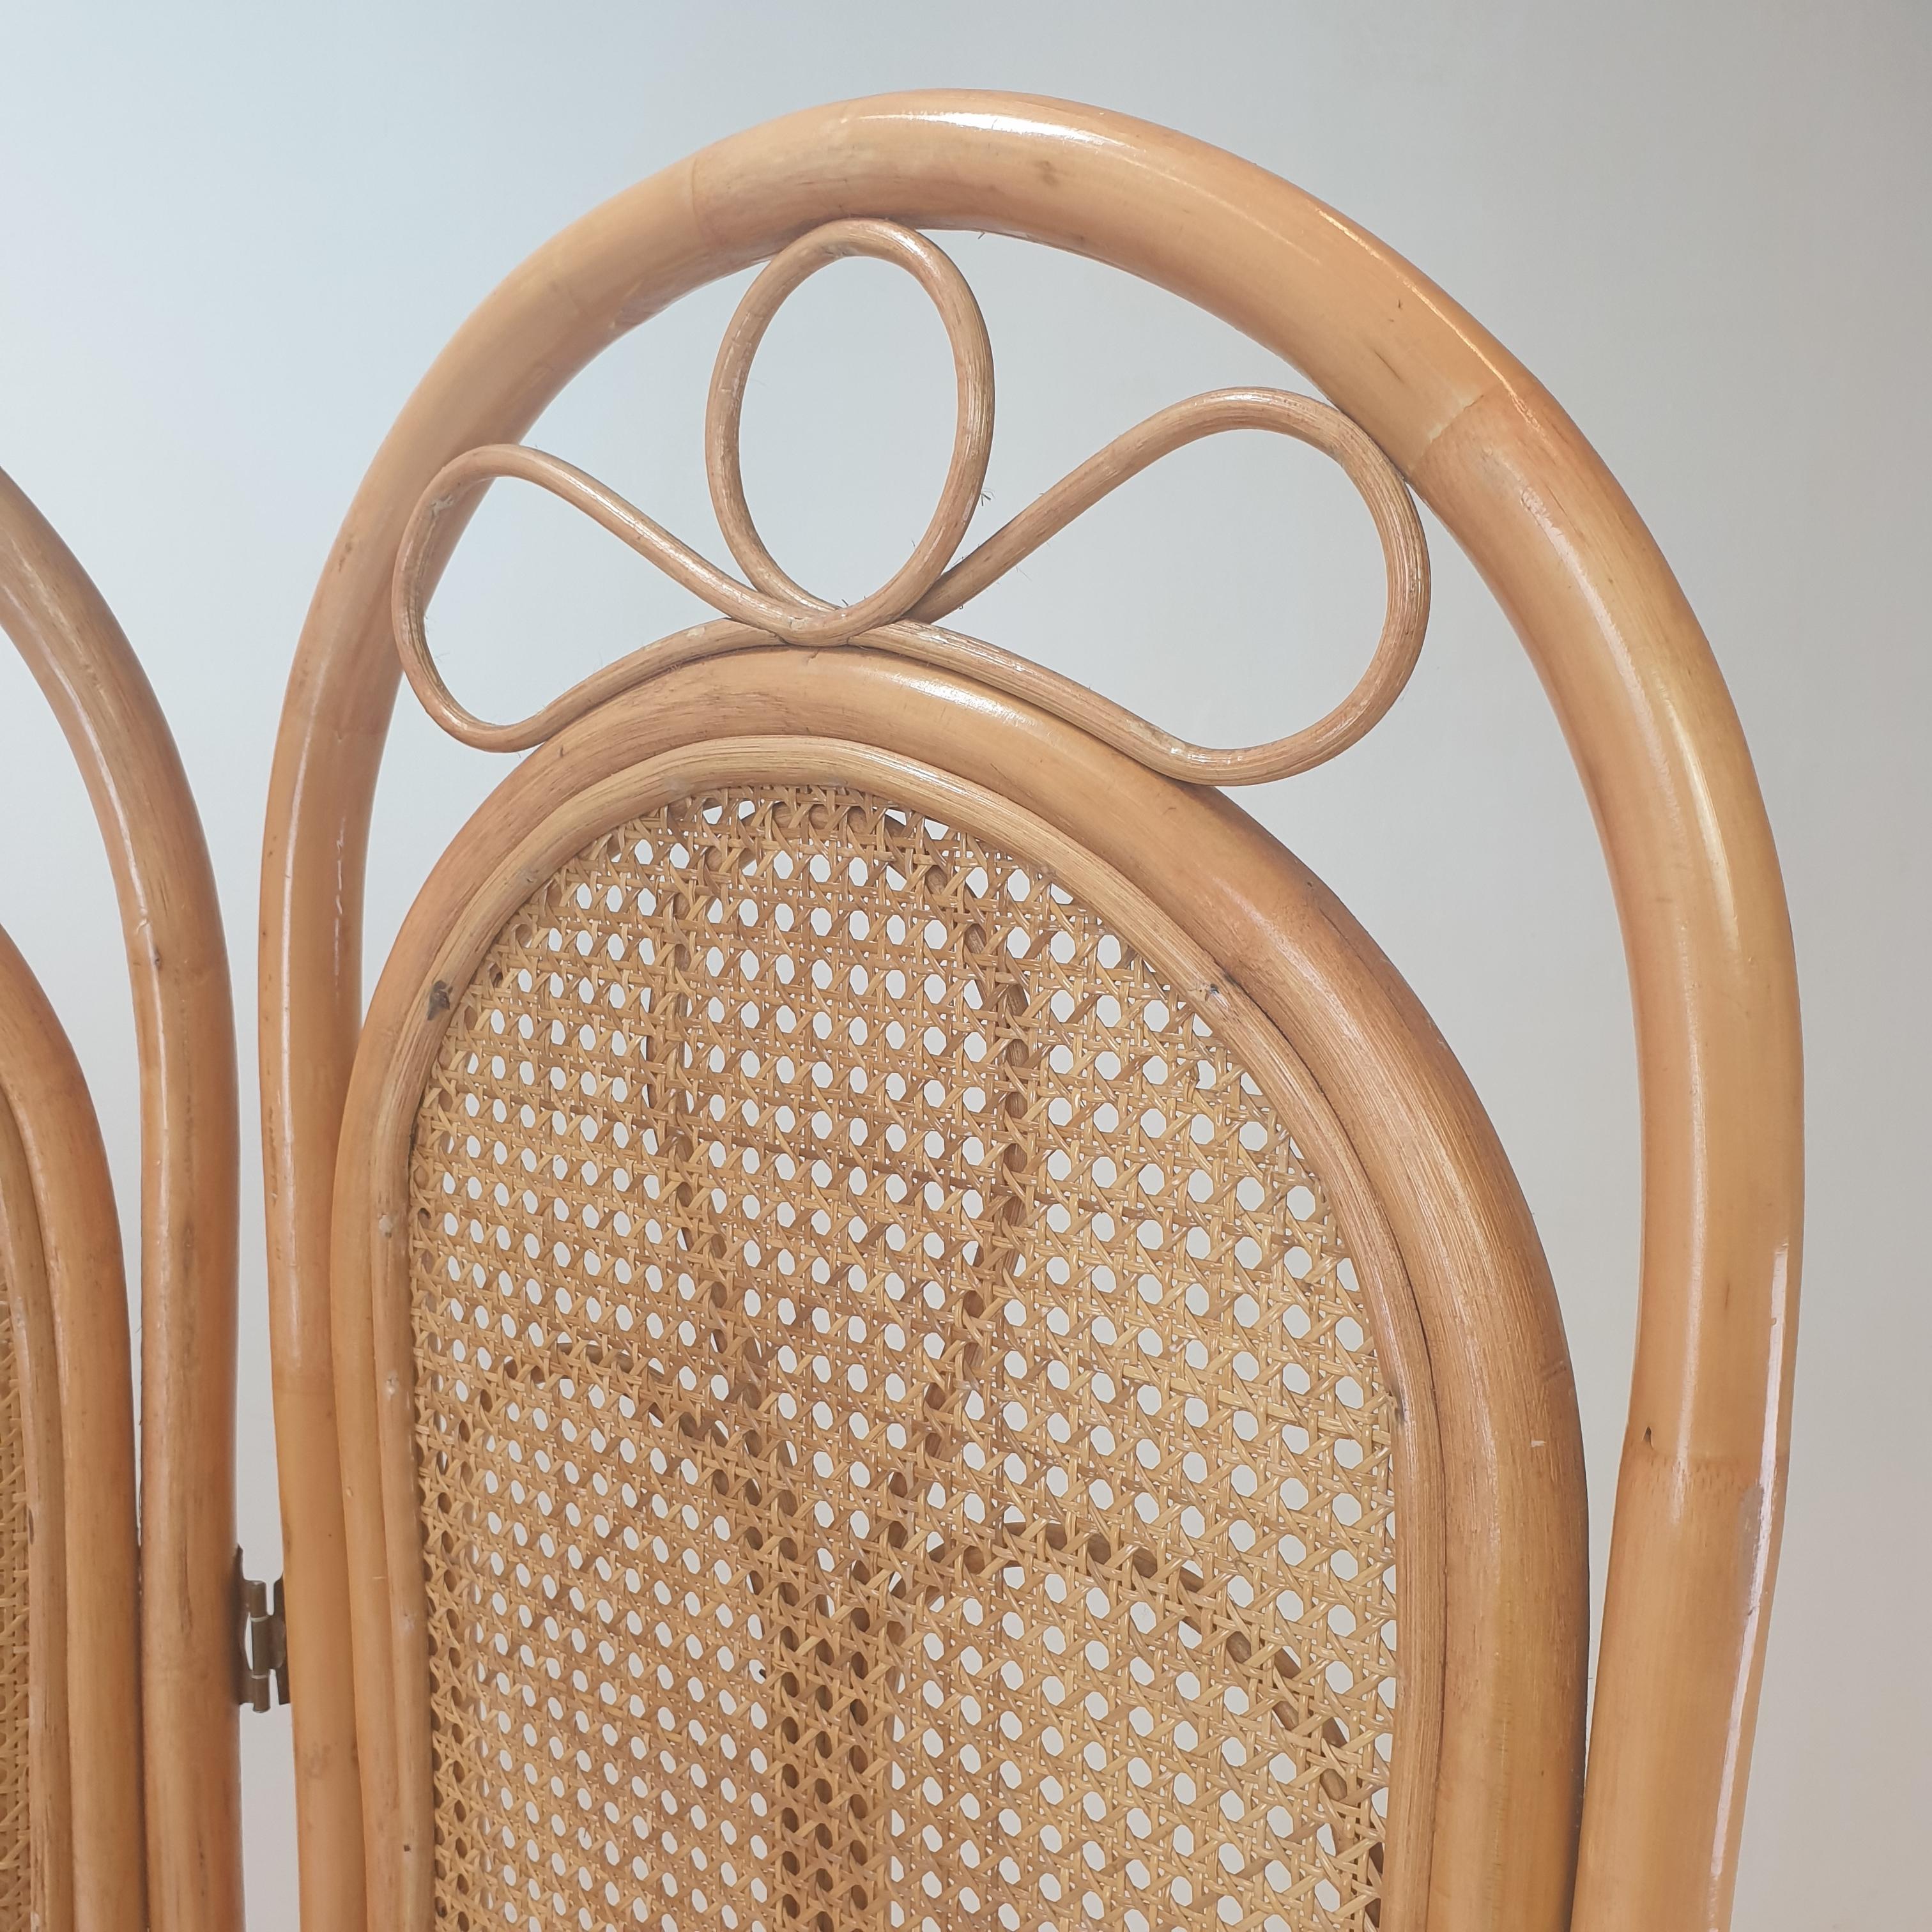 Italian Room Divider in Rattan and Wicker, 1960s For Sale 8